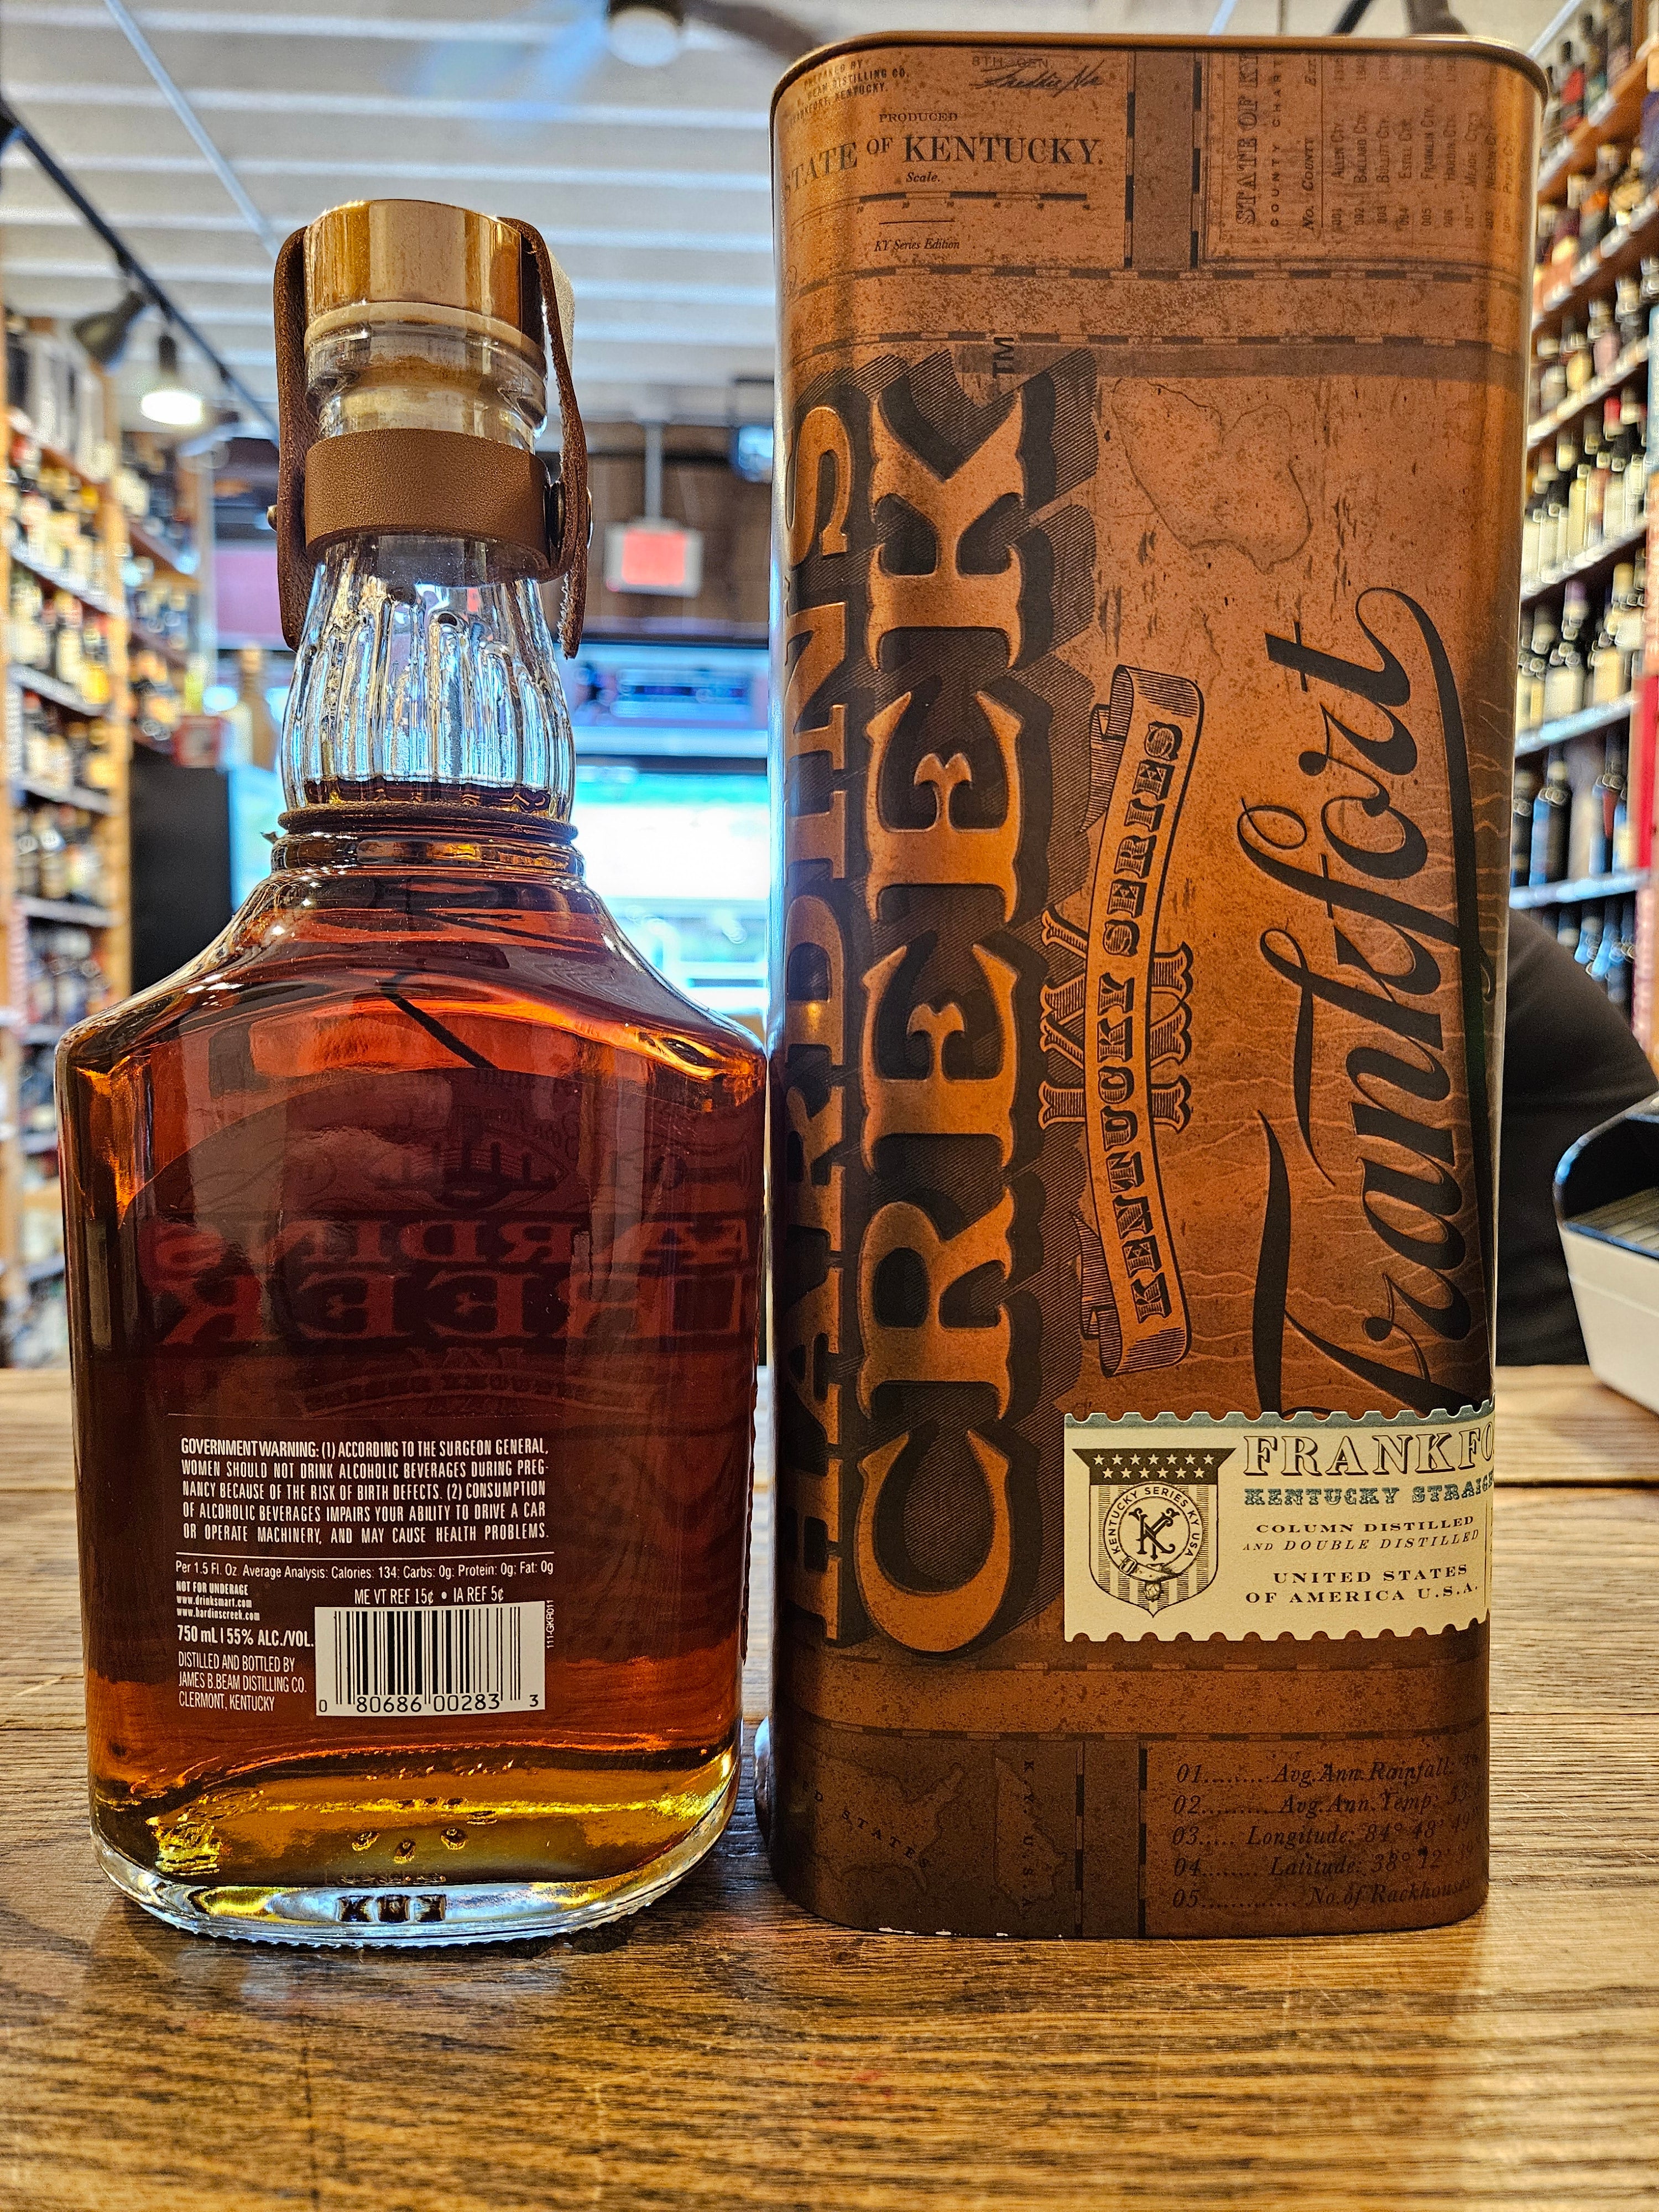 Hardin's Creek Kentucky Straight Bourbon Whiskey Frankfort 750mL the backside of a clear glass squared bottle with a fat neck, a white label, and a copper top, next to a rectangular shaped copper colored box. 